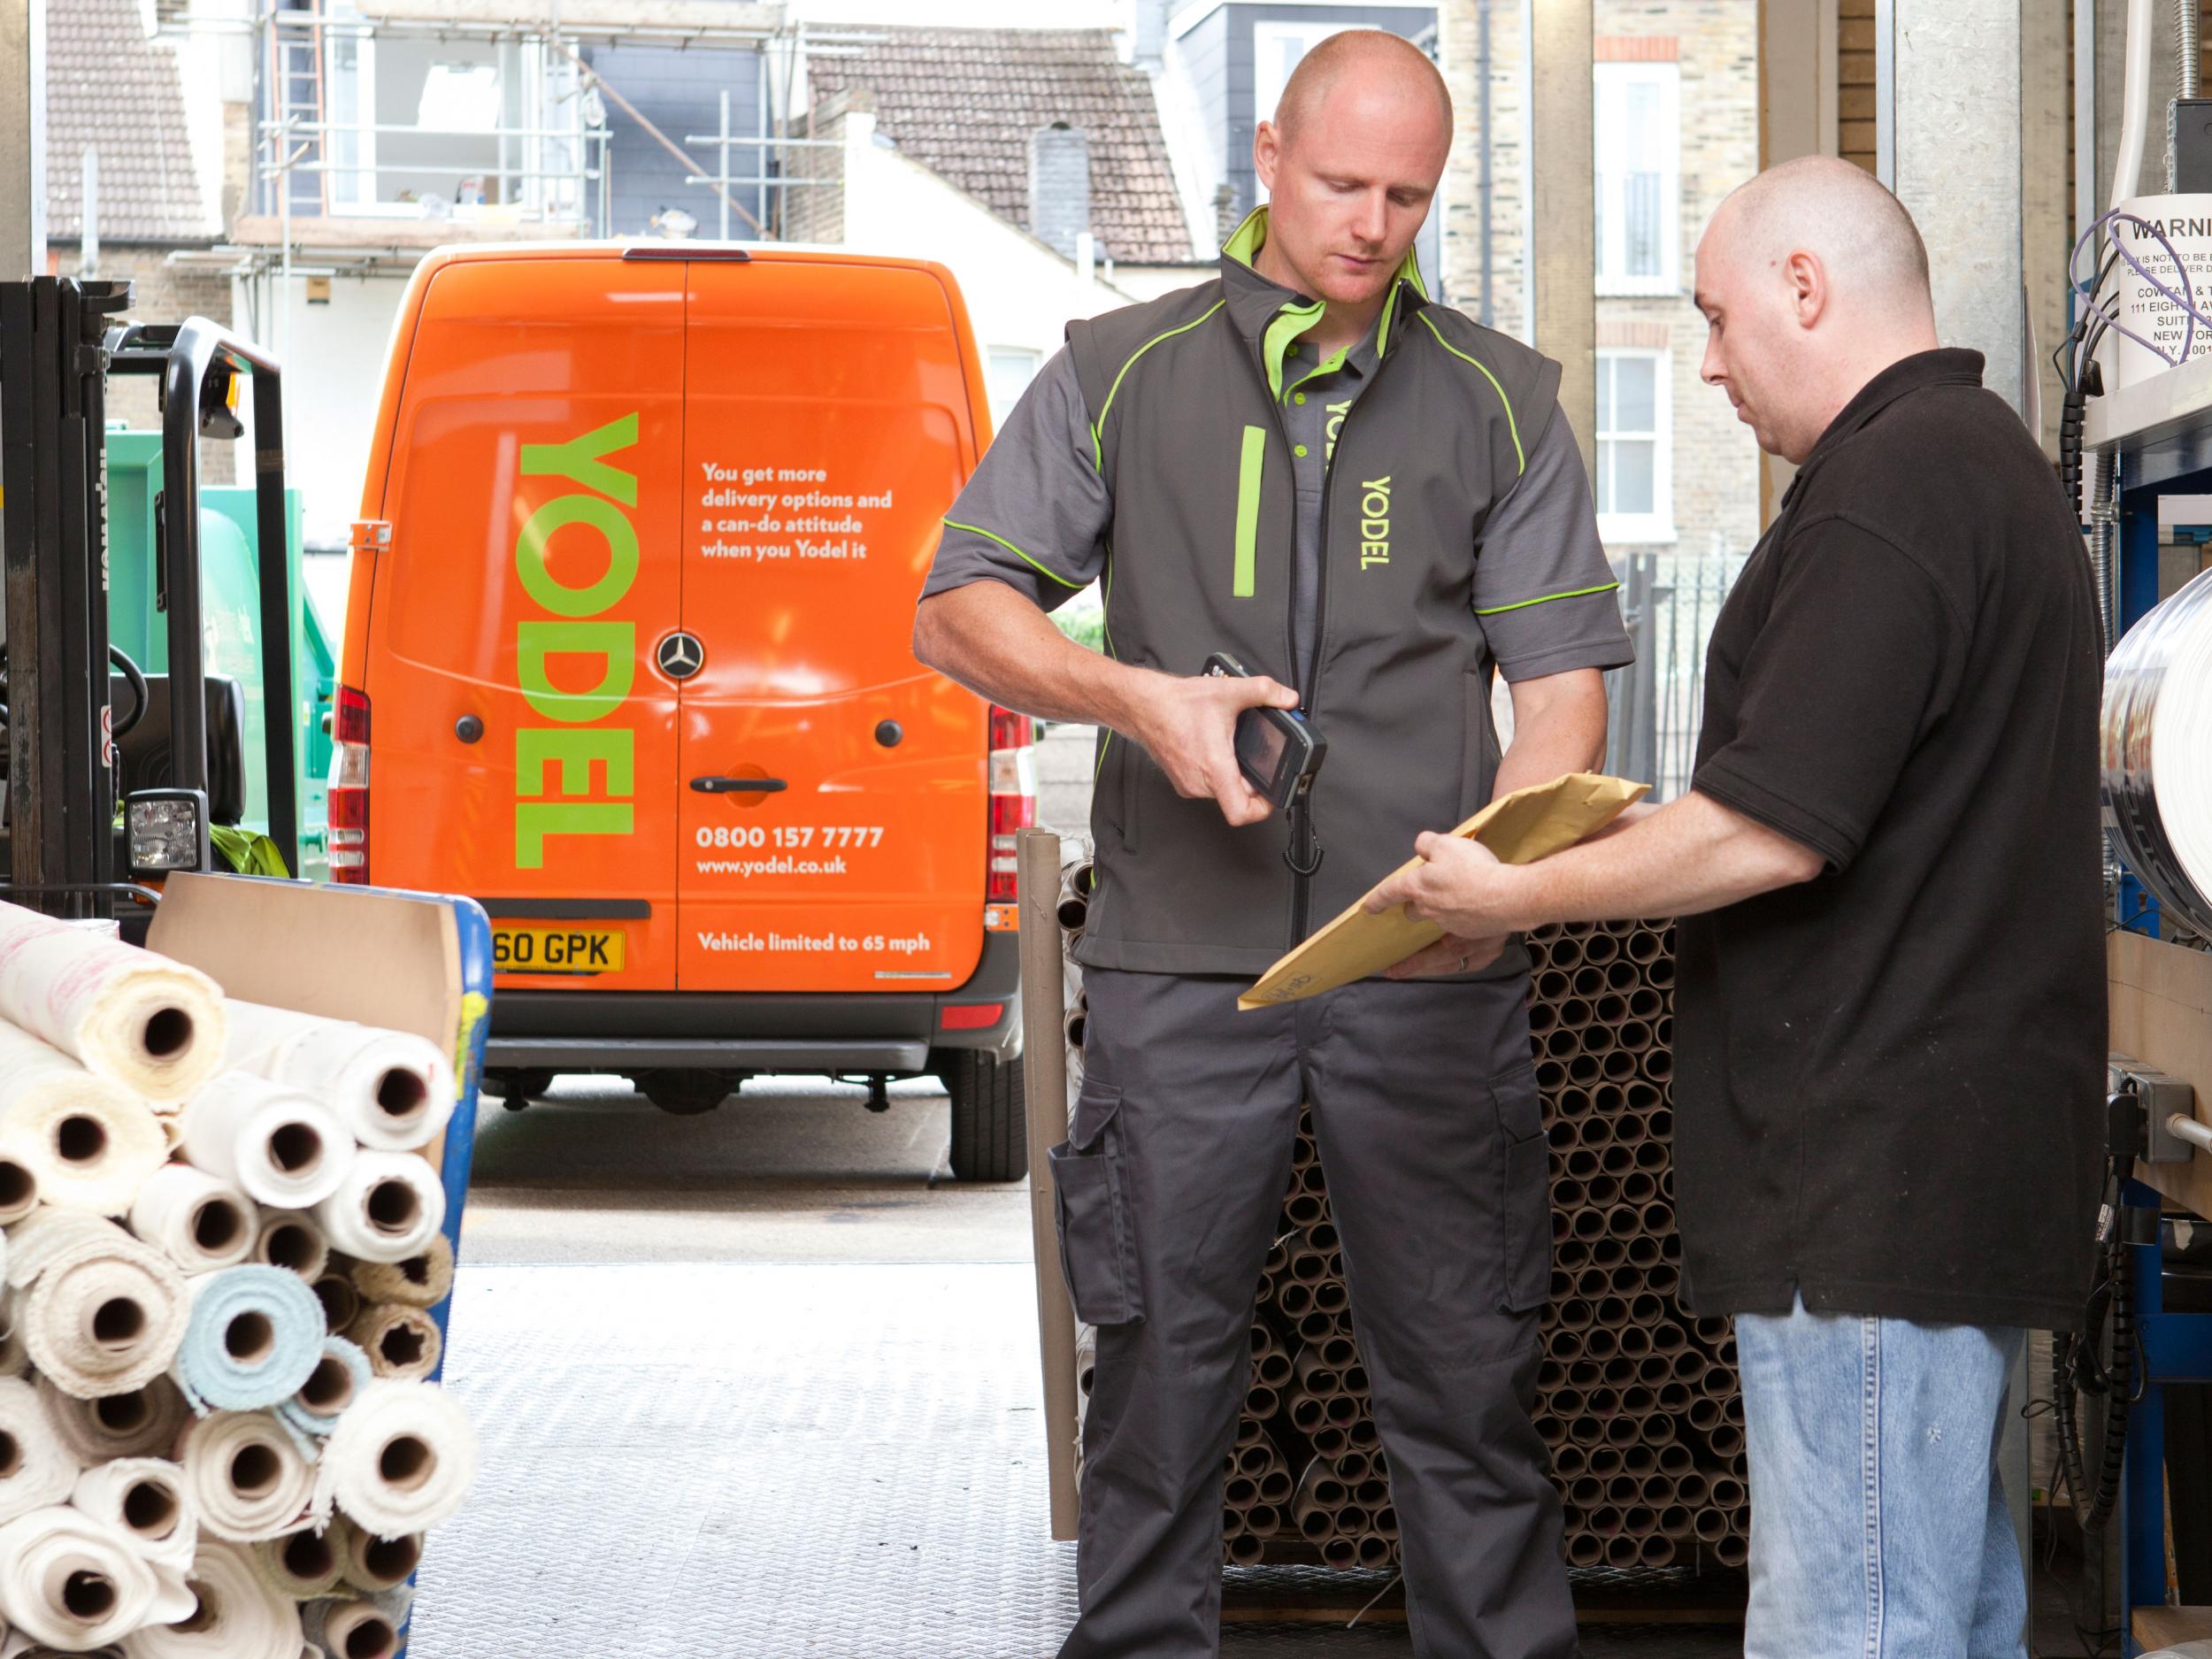 Yodel is looking for 3,000 self-employed couriers